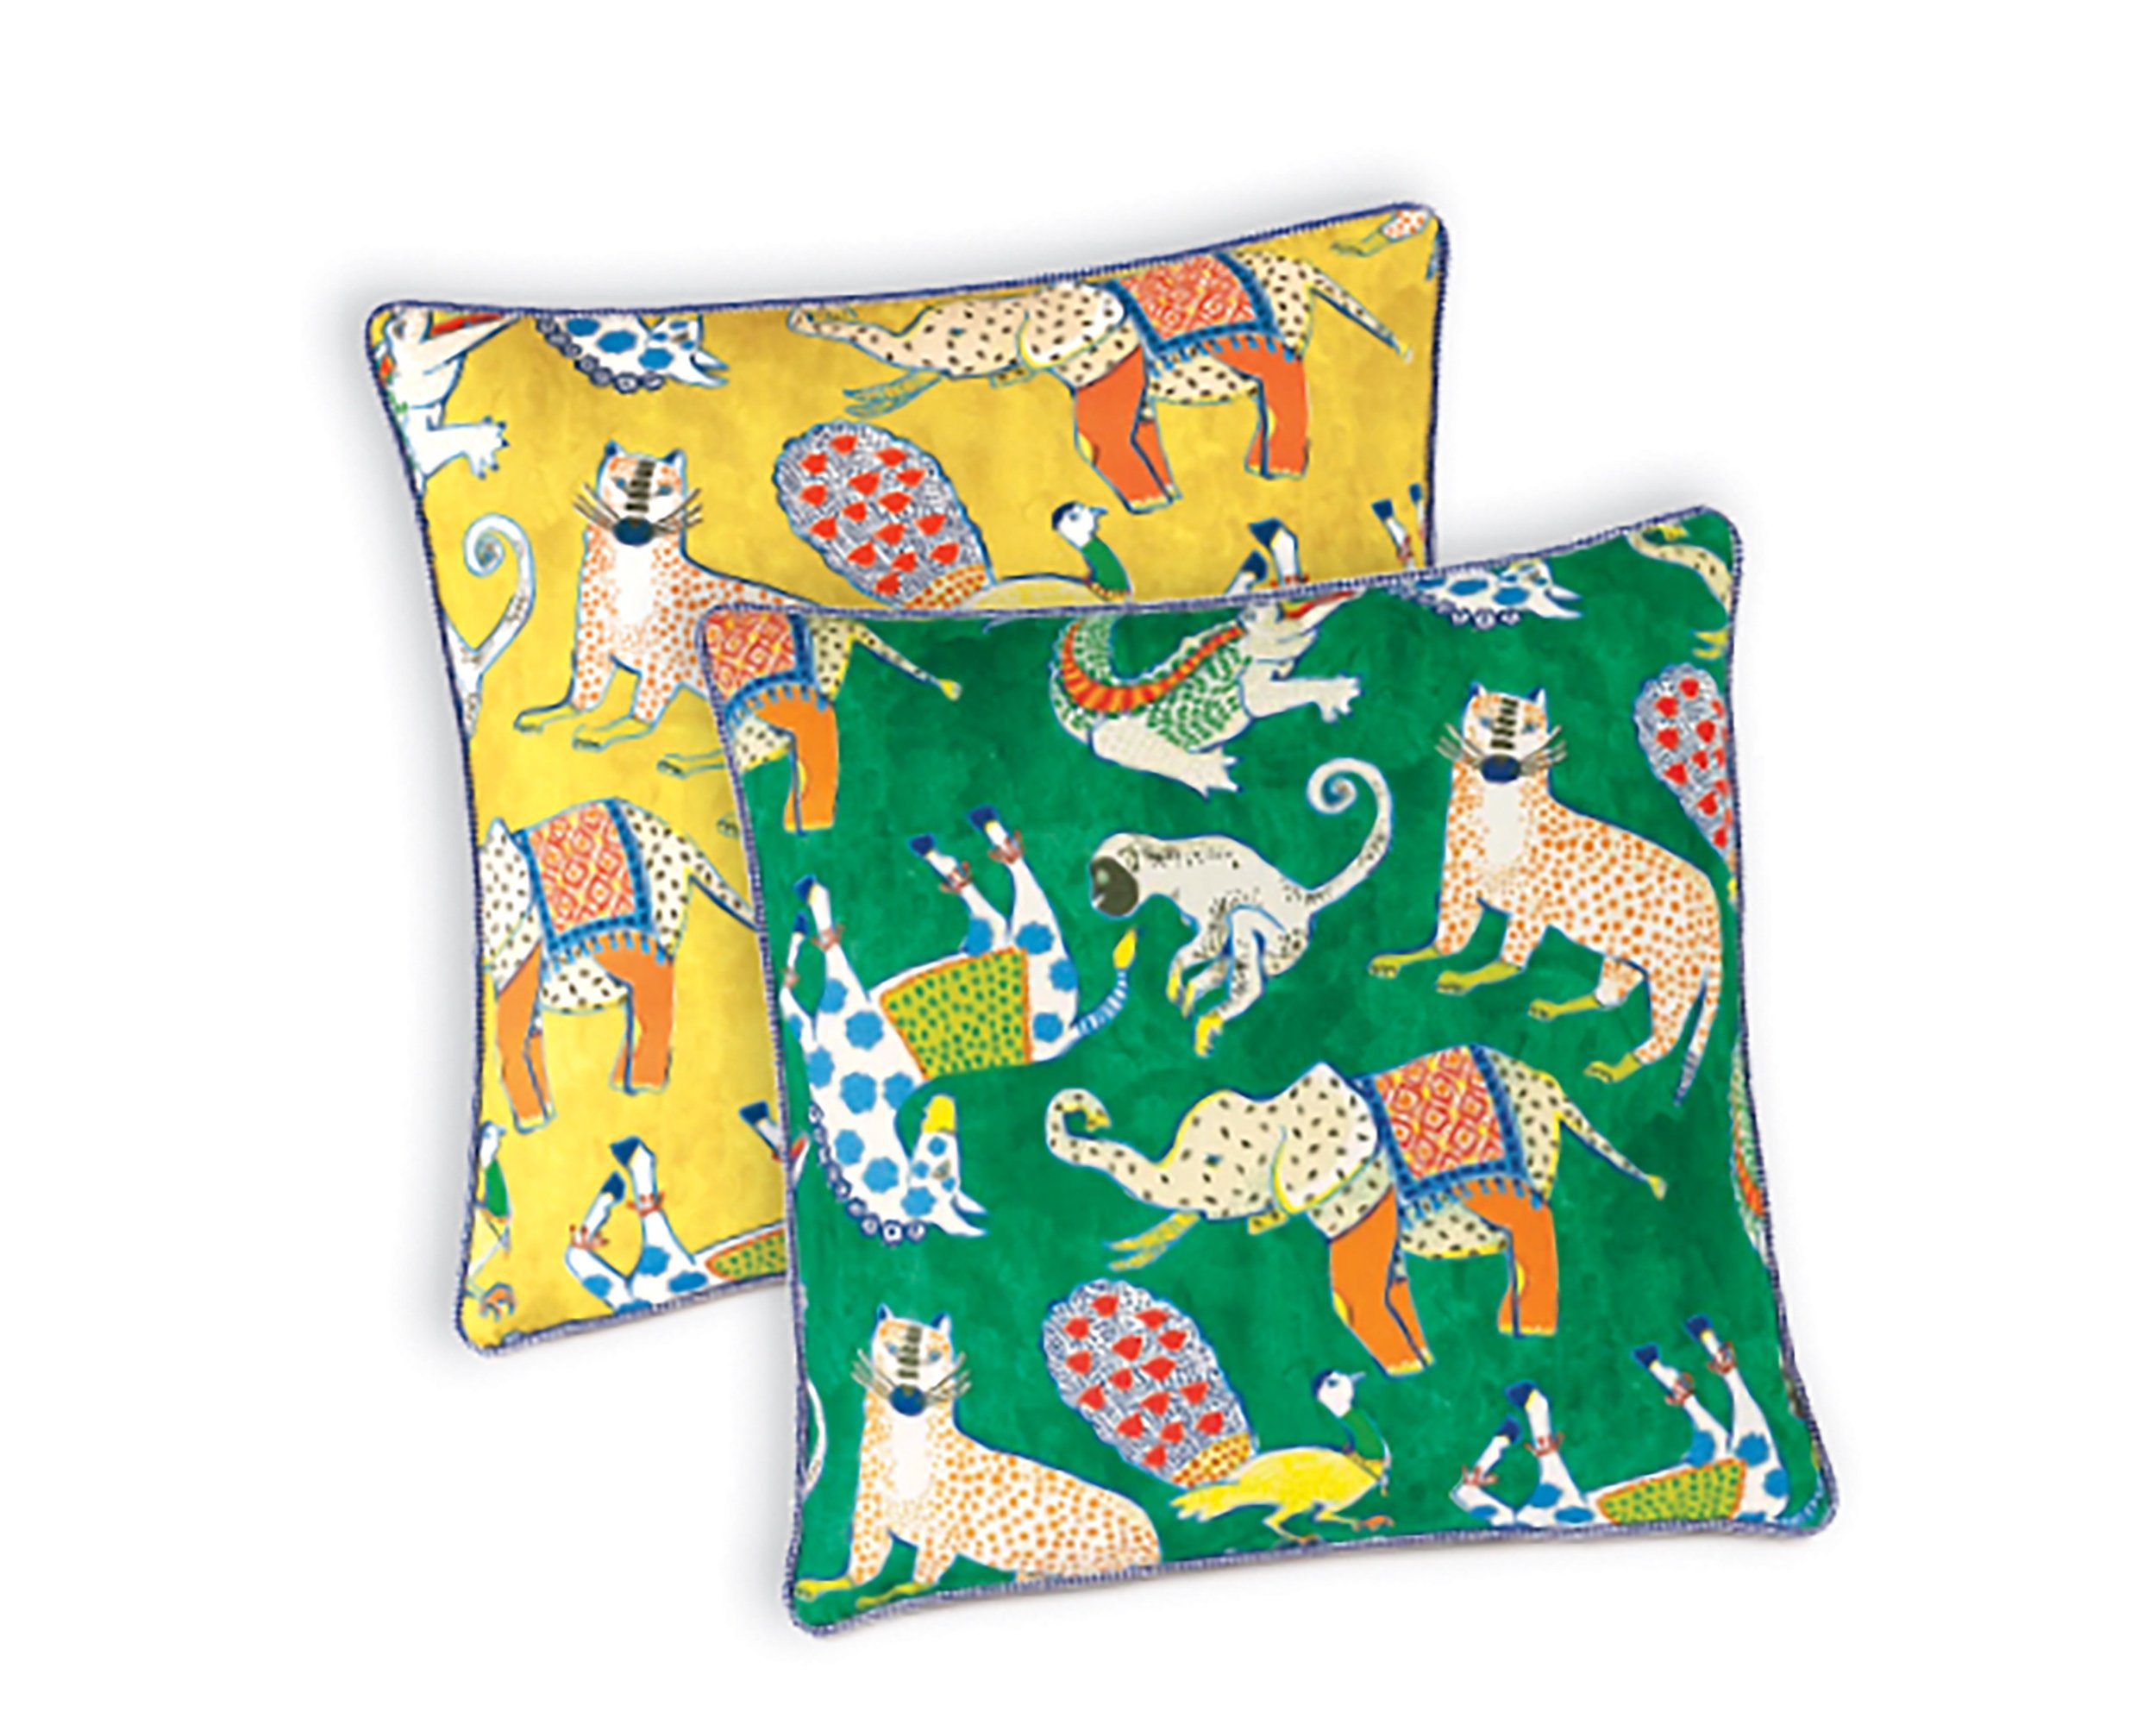  Step into the whimsical world of  Hullabaloo,  a delightful menagerie that march across these vibrant, reversible decorative pillows. Adorably colourful hand-painted dots and animals add charm to this endearing collection.  www.bedsidemanor.ky  